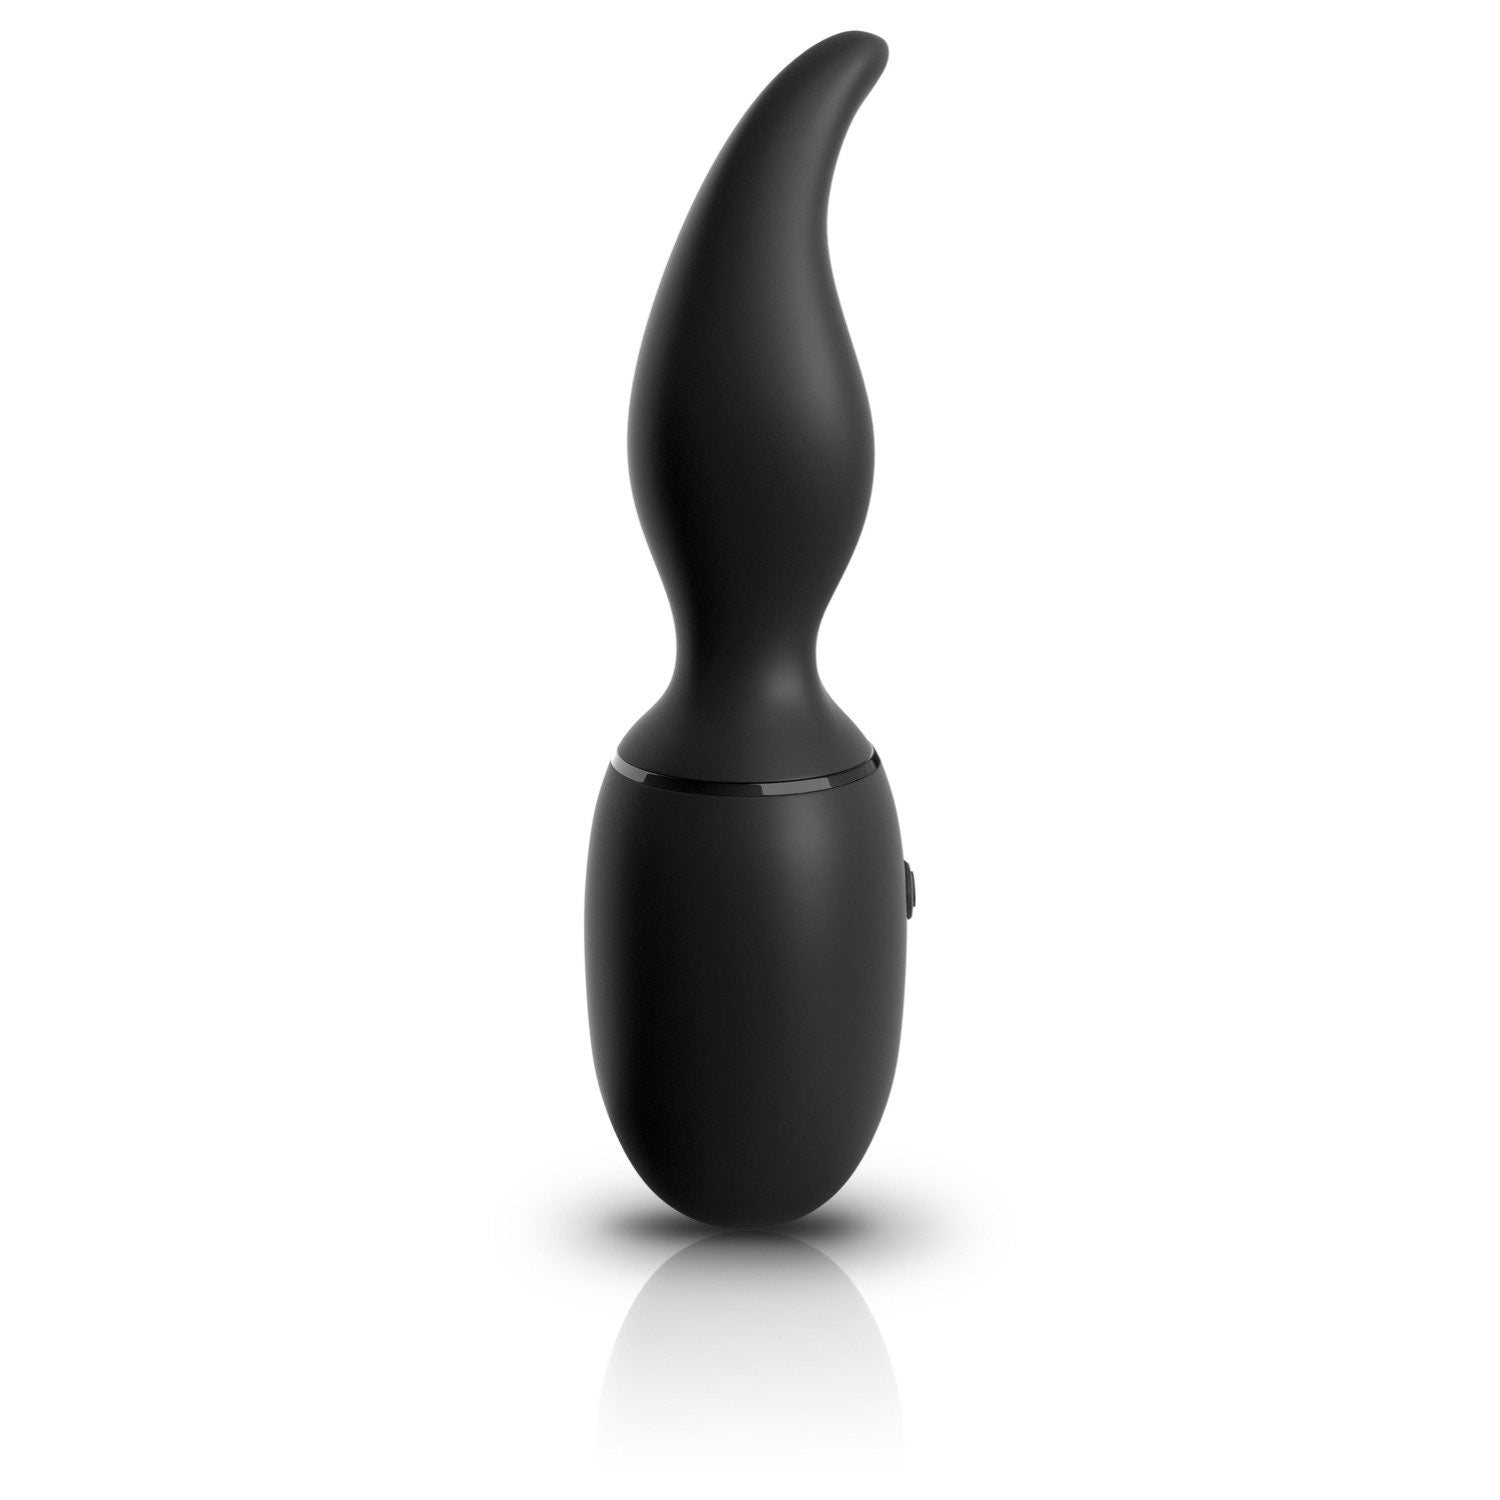 Sir Richards Control Ultimate Silicone Rimmer - Black USB Rechargeable Anal Stimulator by Pipedream